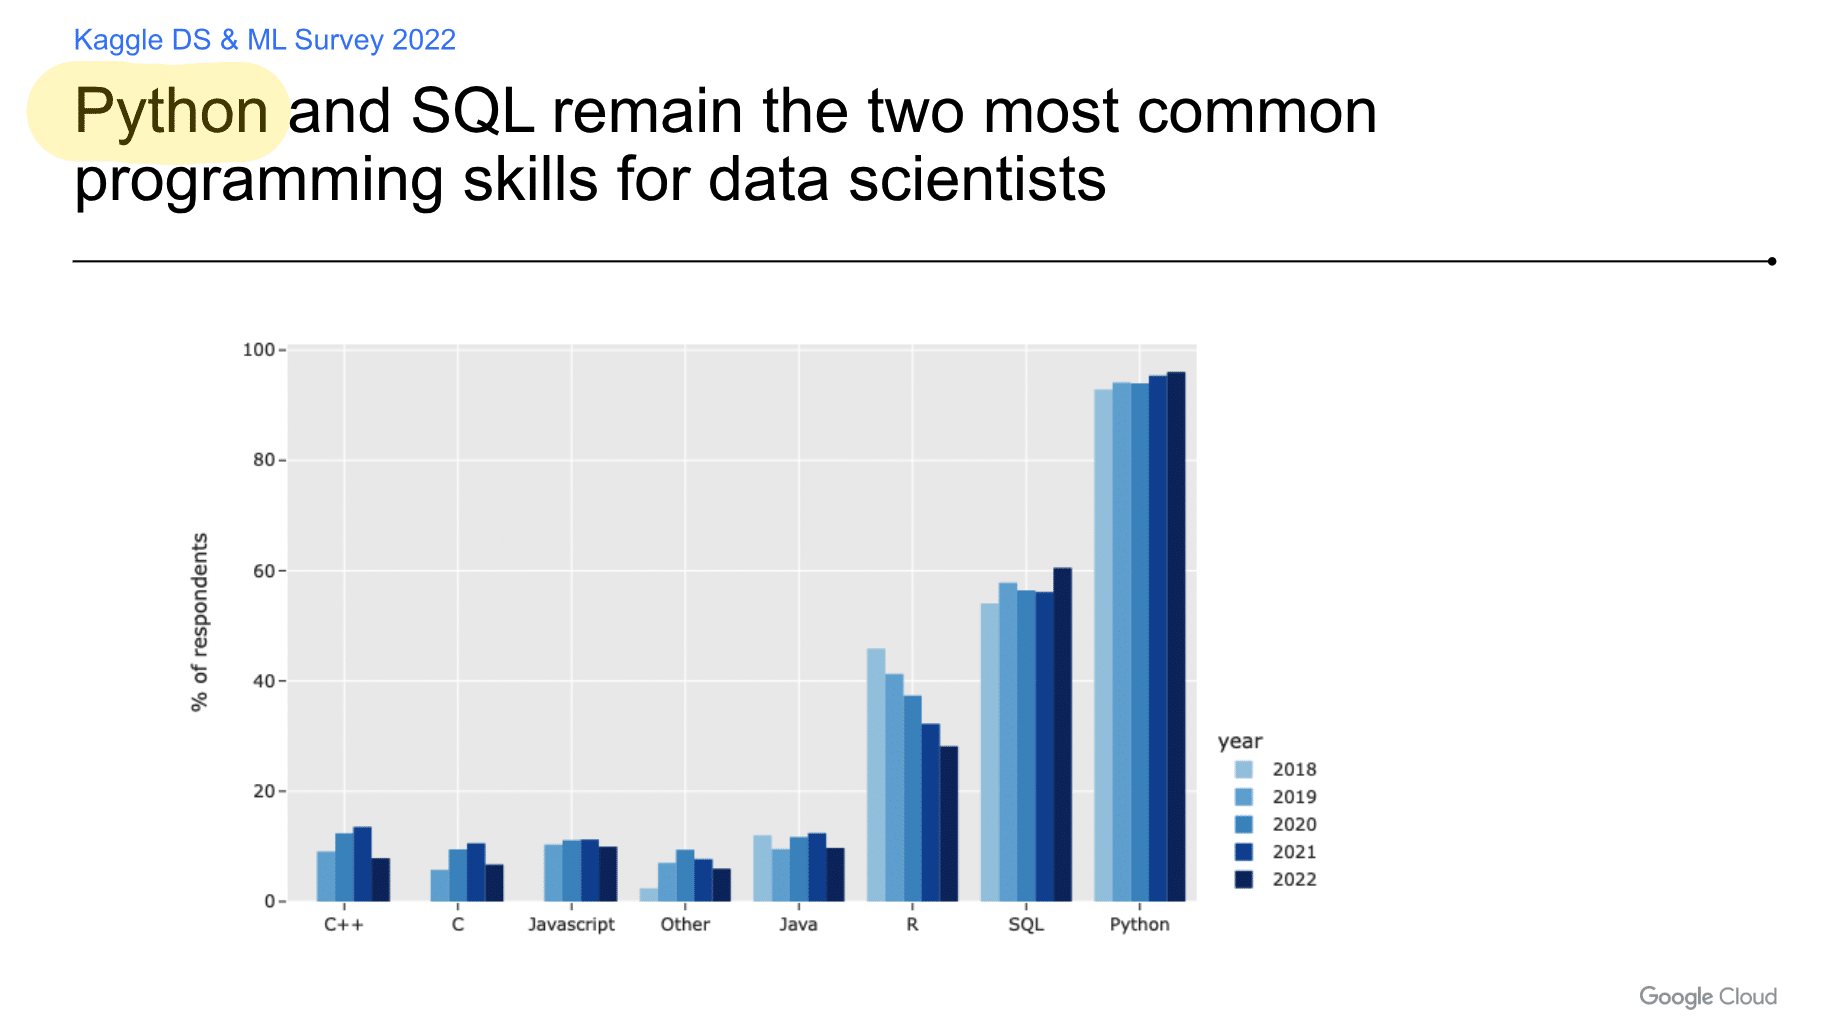 A graphic illustrating the importance of Python in data science based on KAGGLE Data 2022